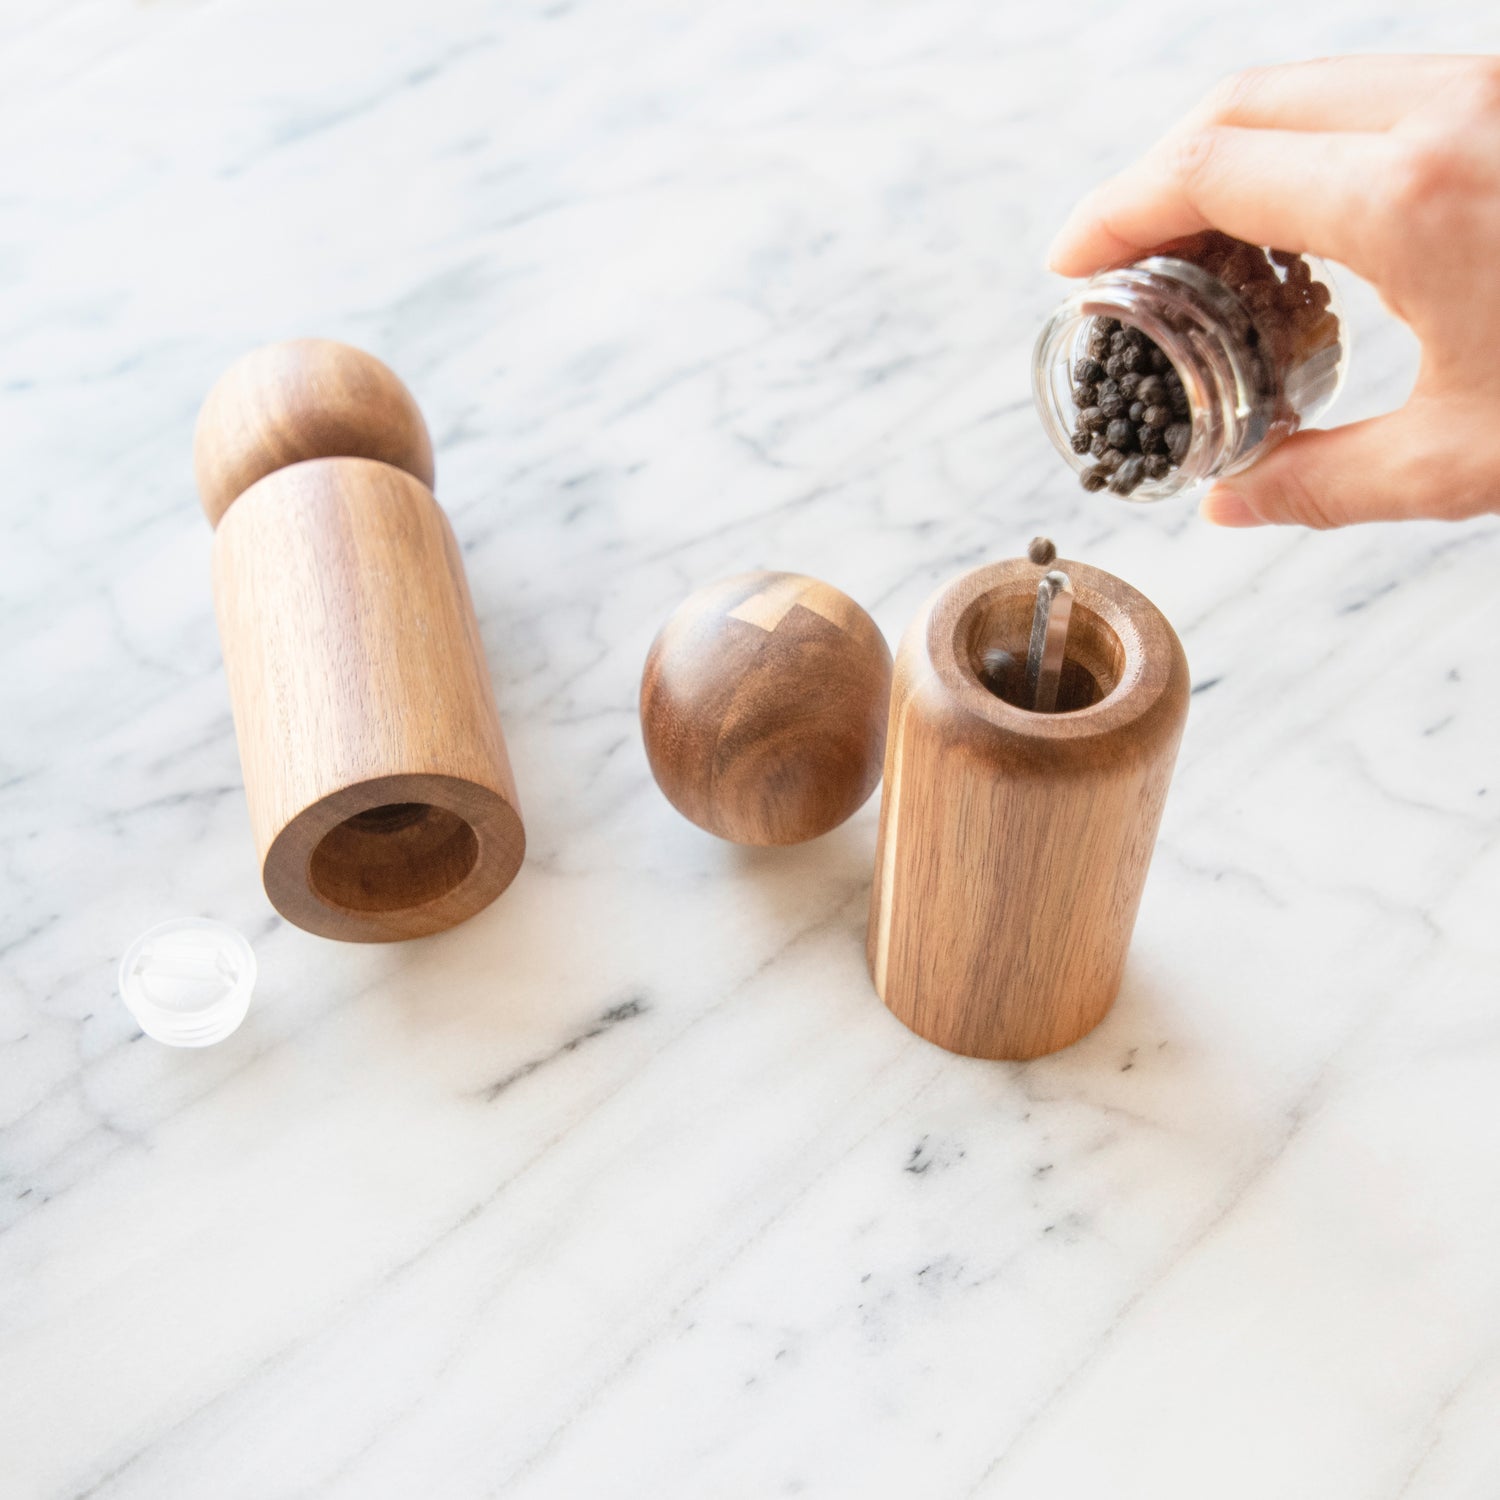 Spice mills, salt & pepper grinders and shakers